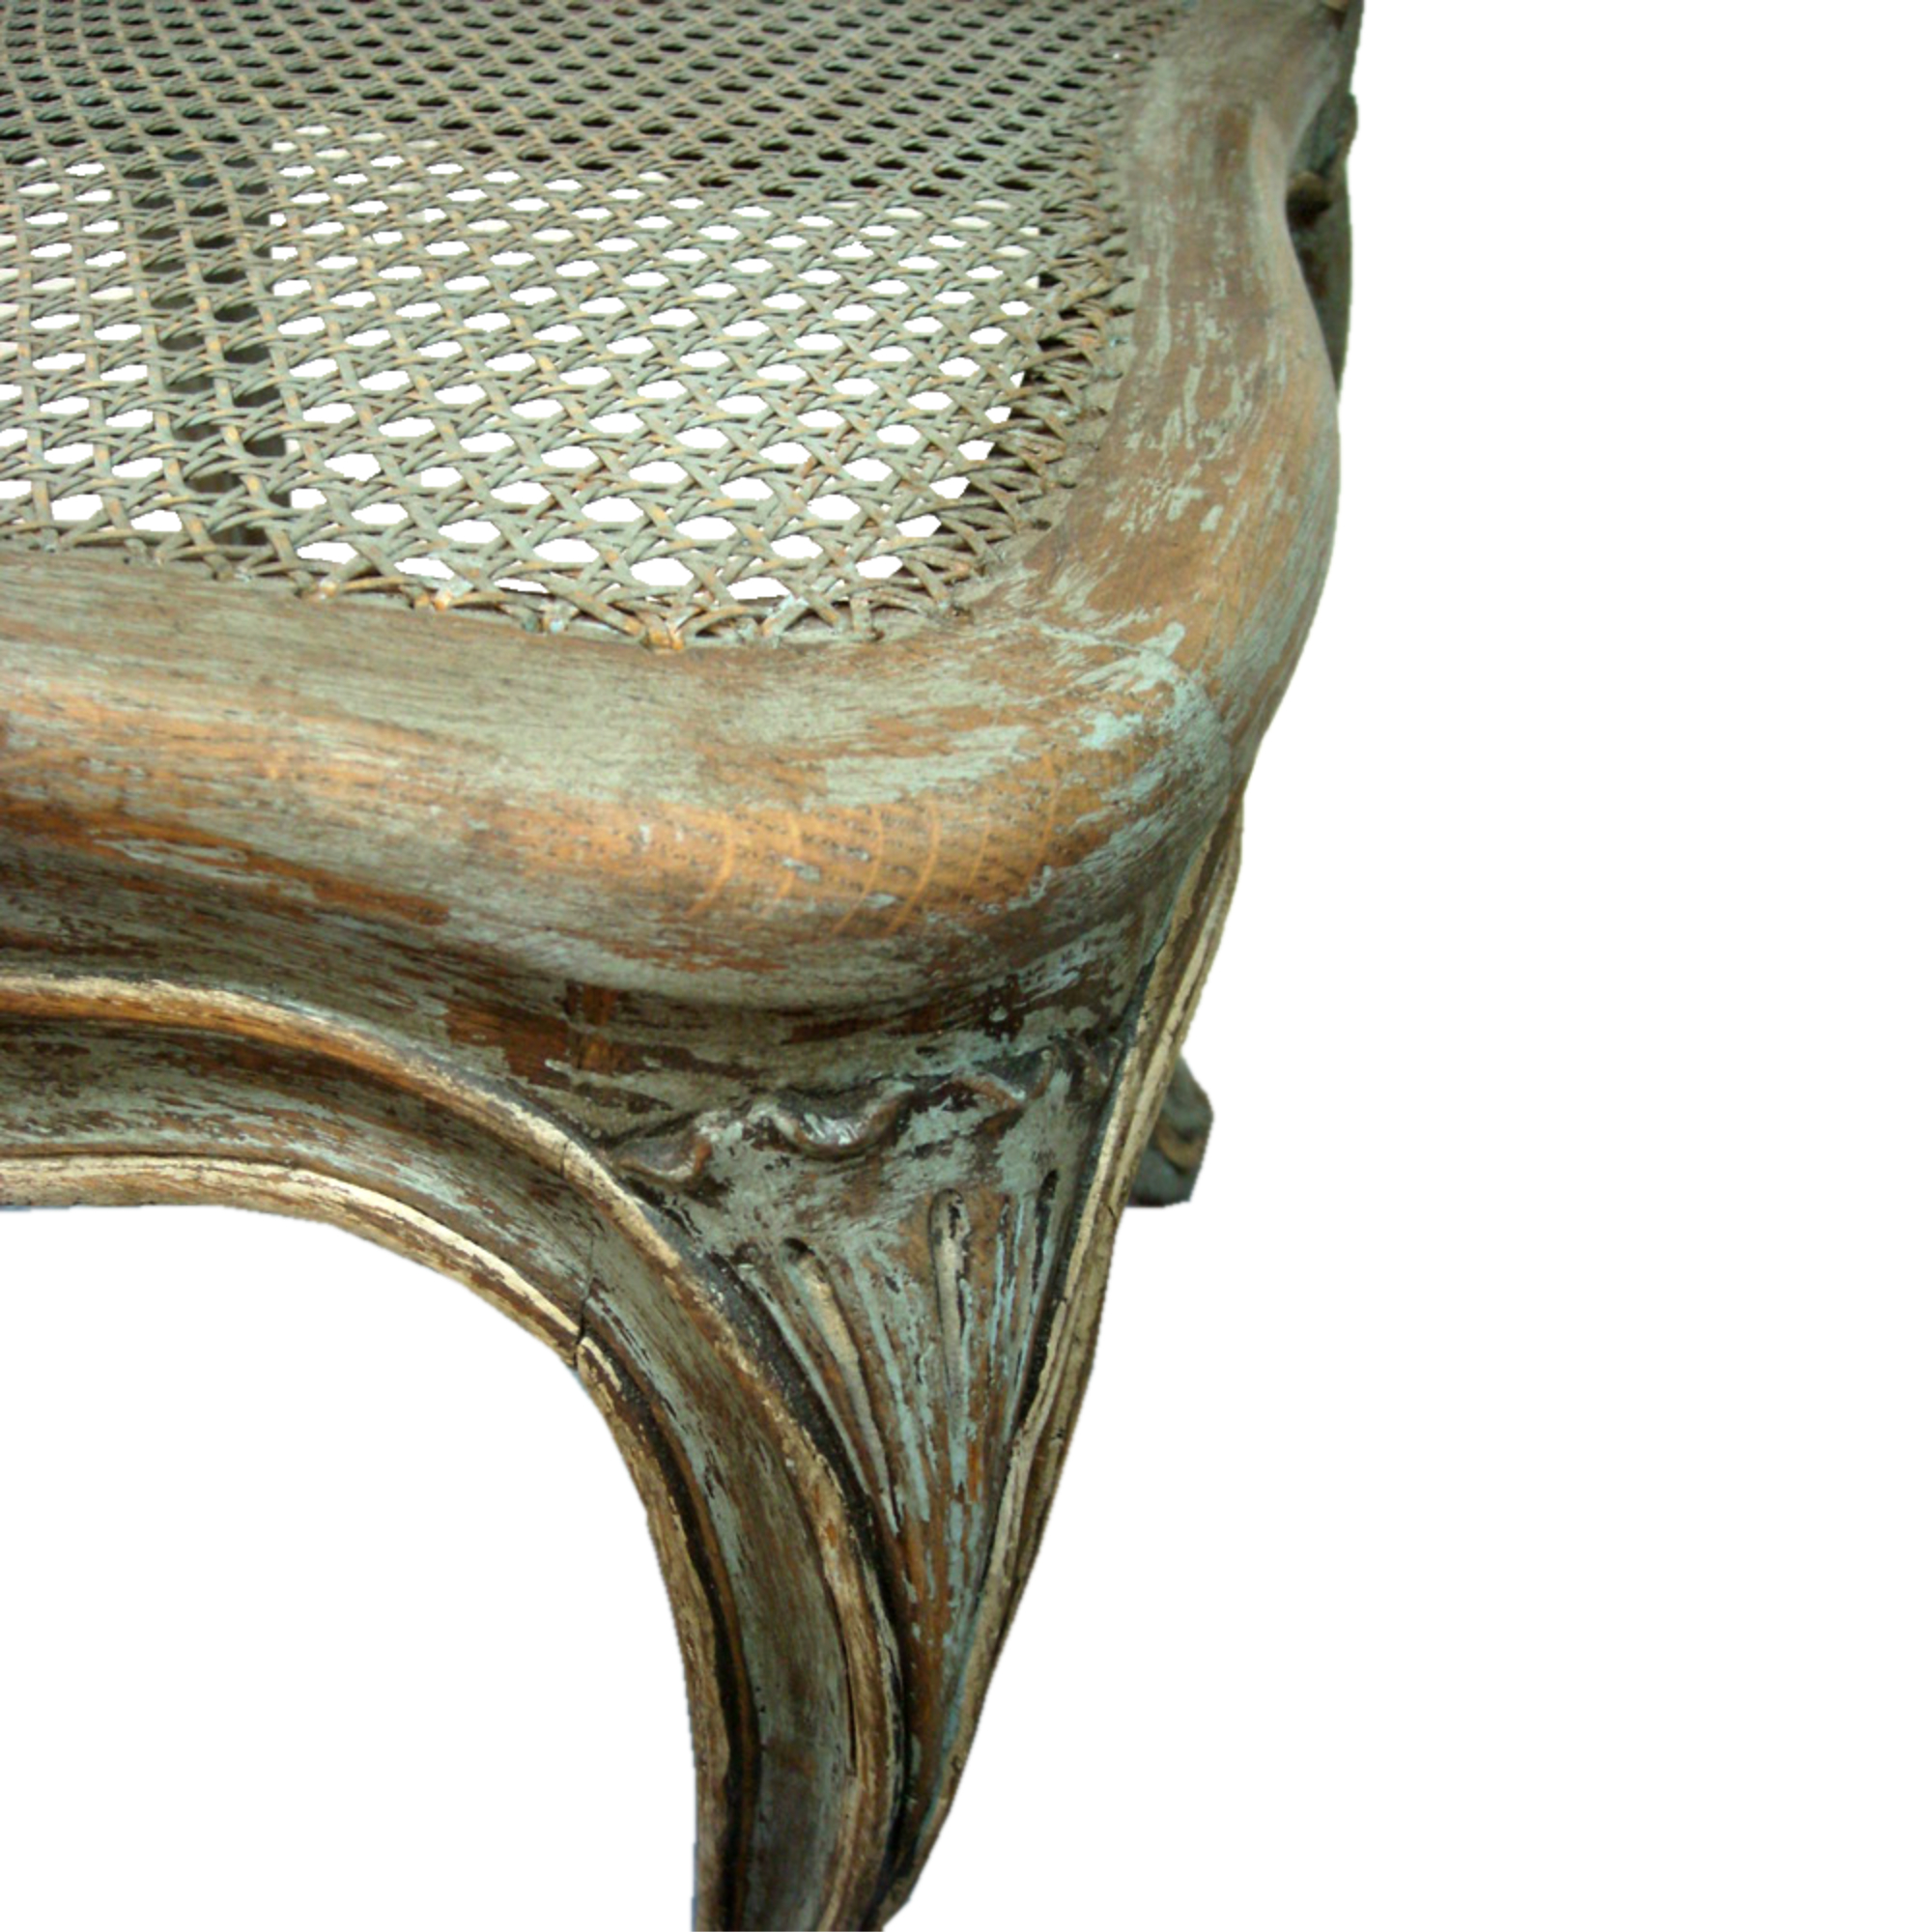 Antiqued-chair-cained.jpg